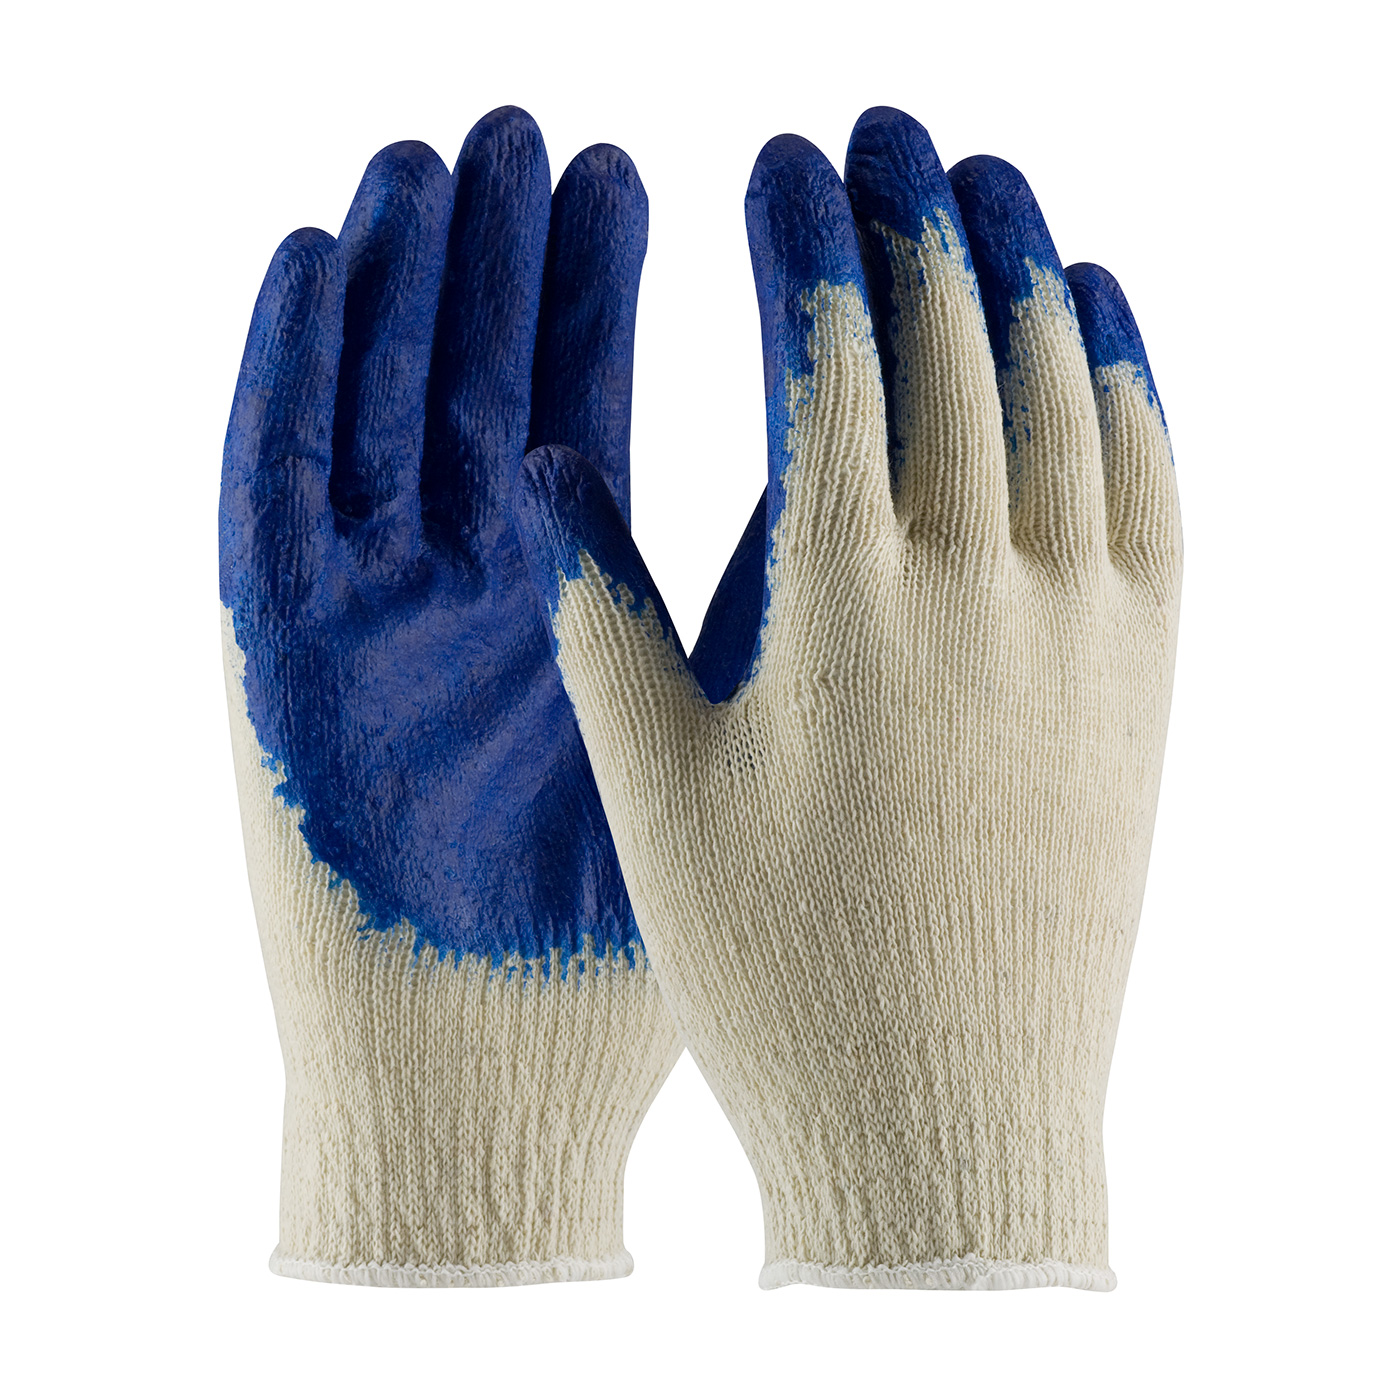 PIP 39-C120/L Seamless Knit Cotton/Polyester Glove with Latex Coated Smooth Grip on Palm & Fingers - Economy Grade - Large PID-39 C120 L